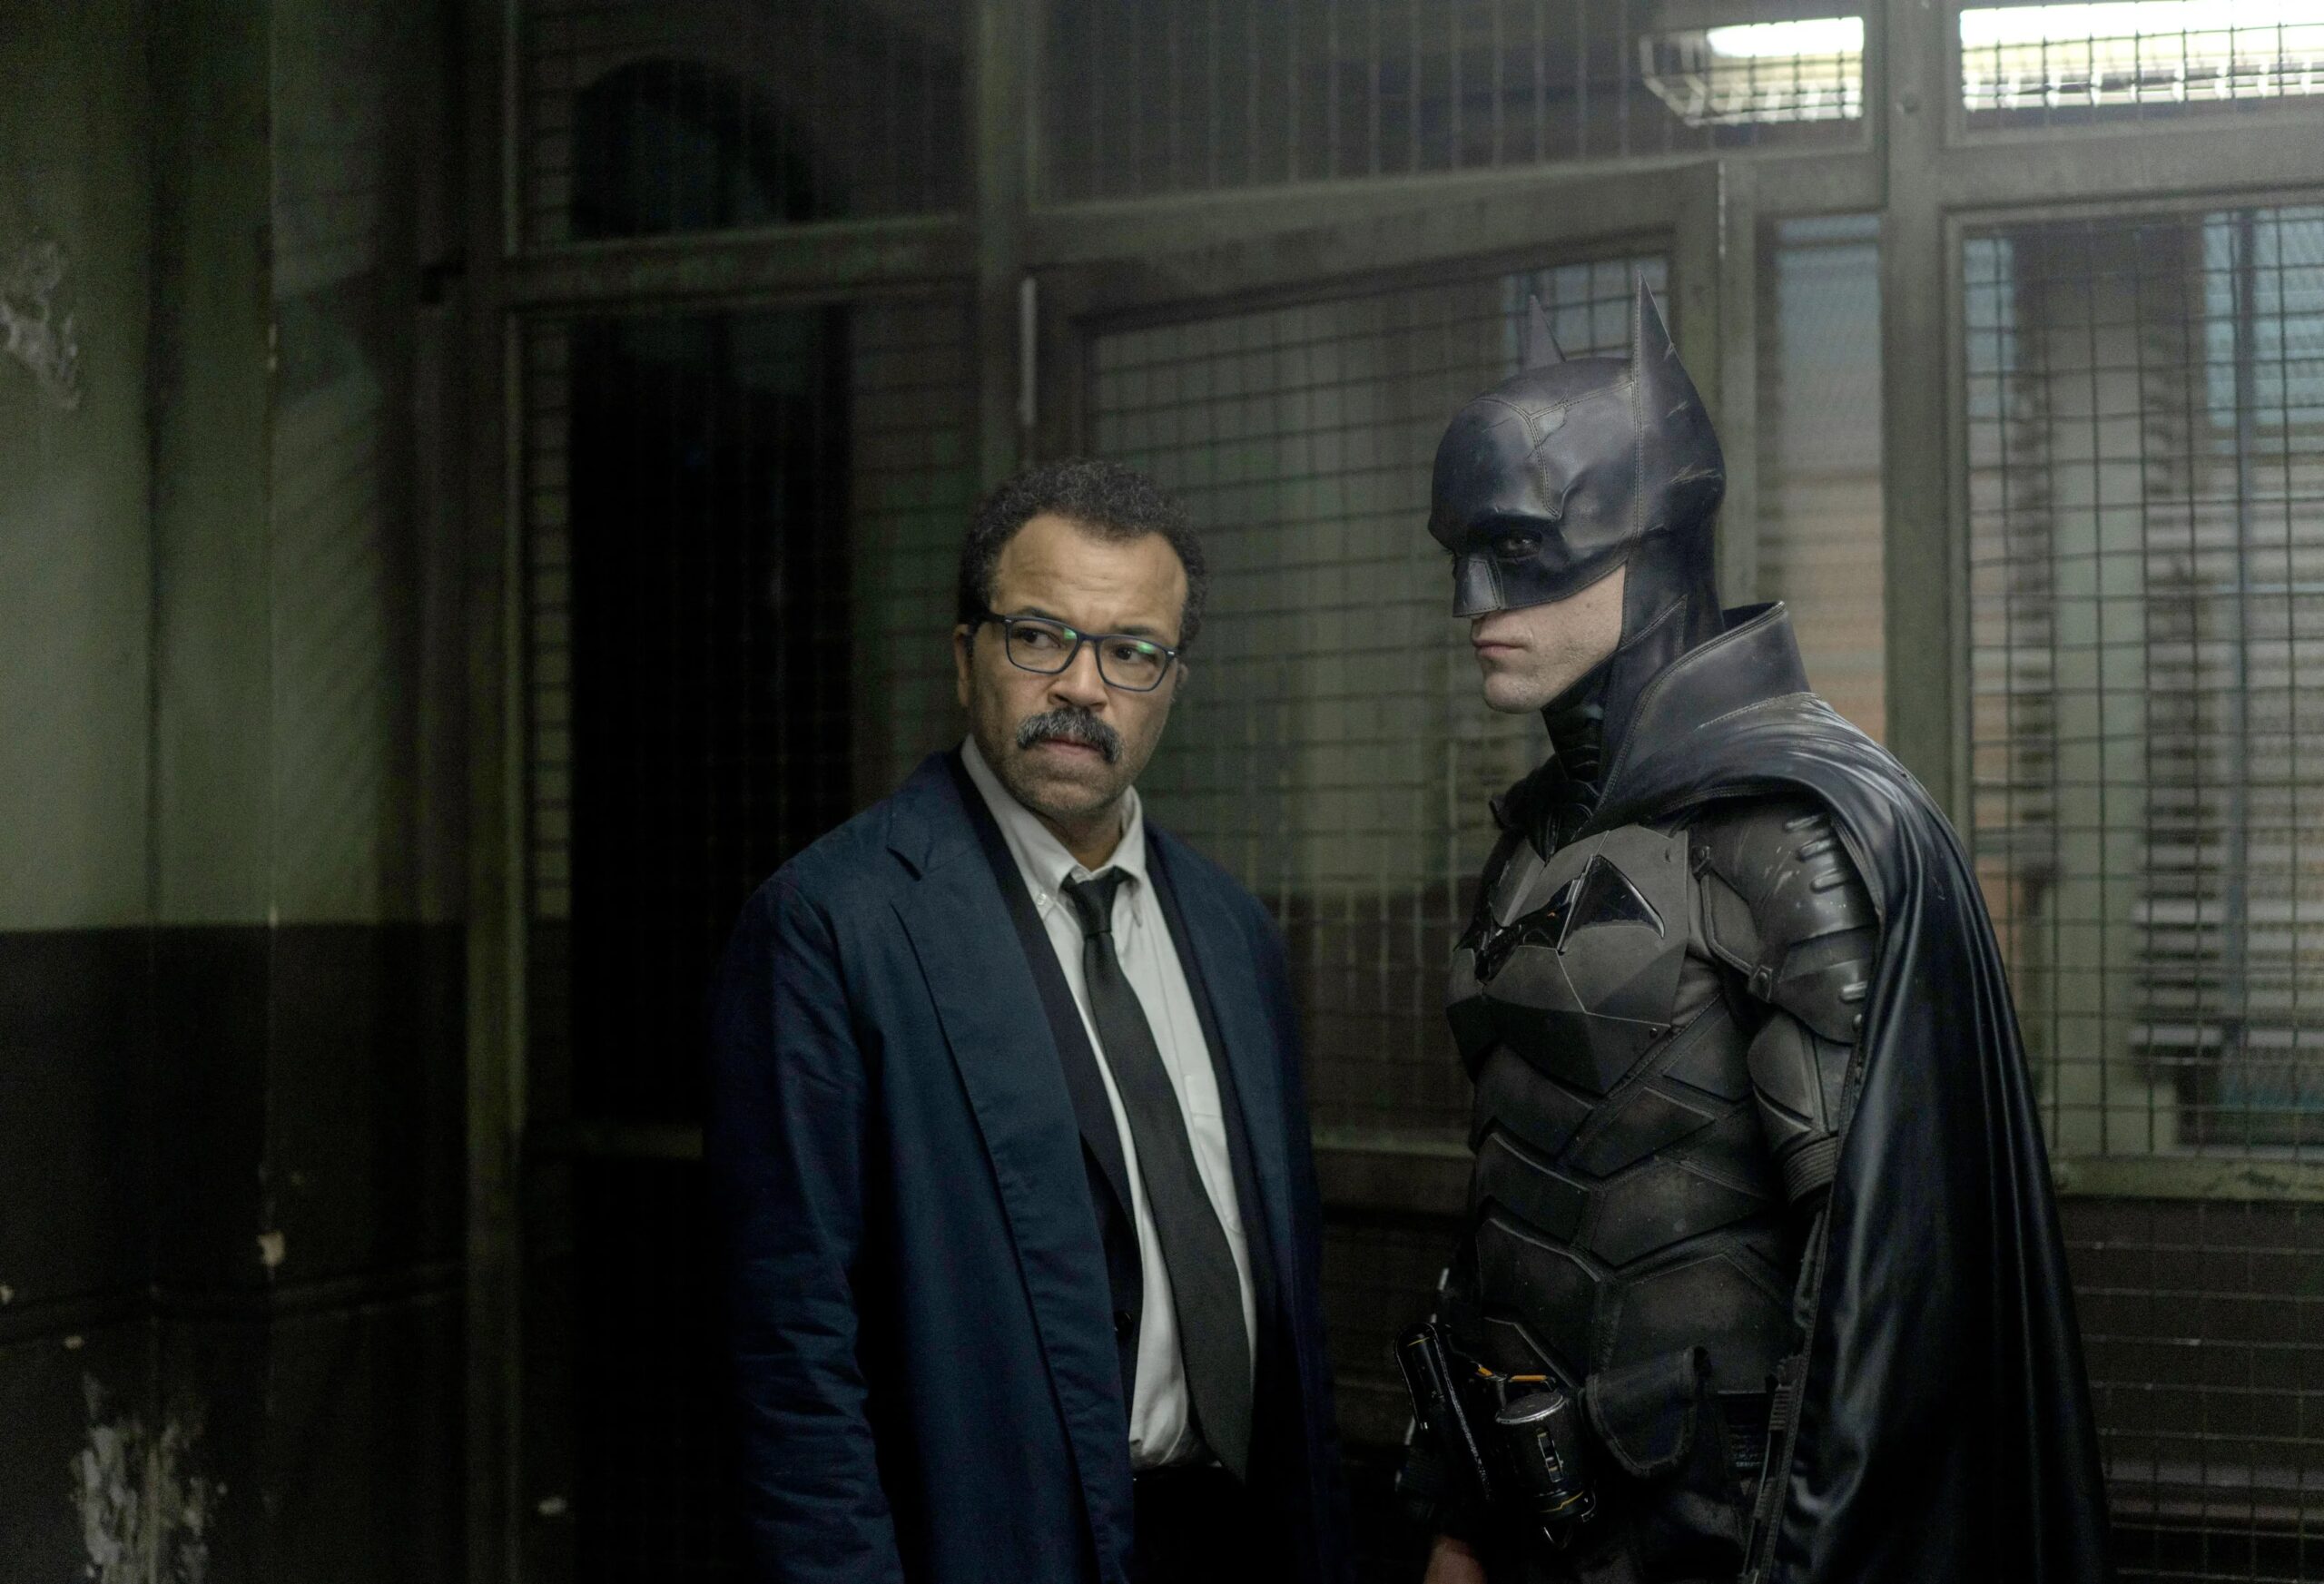 In a still from The Batman, Commissioner Jim Gordon and Batman stand together in a dingy Gotham City police station.